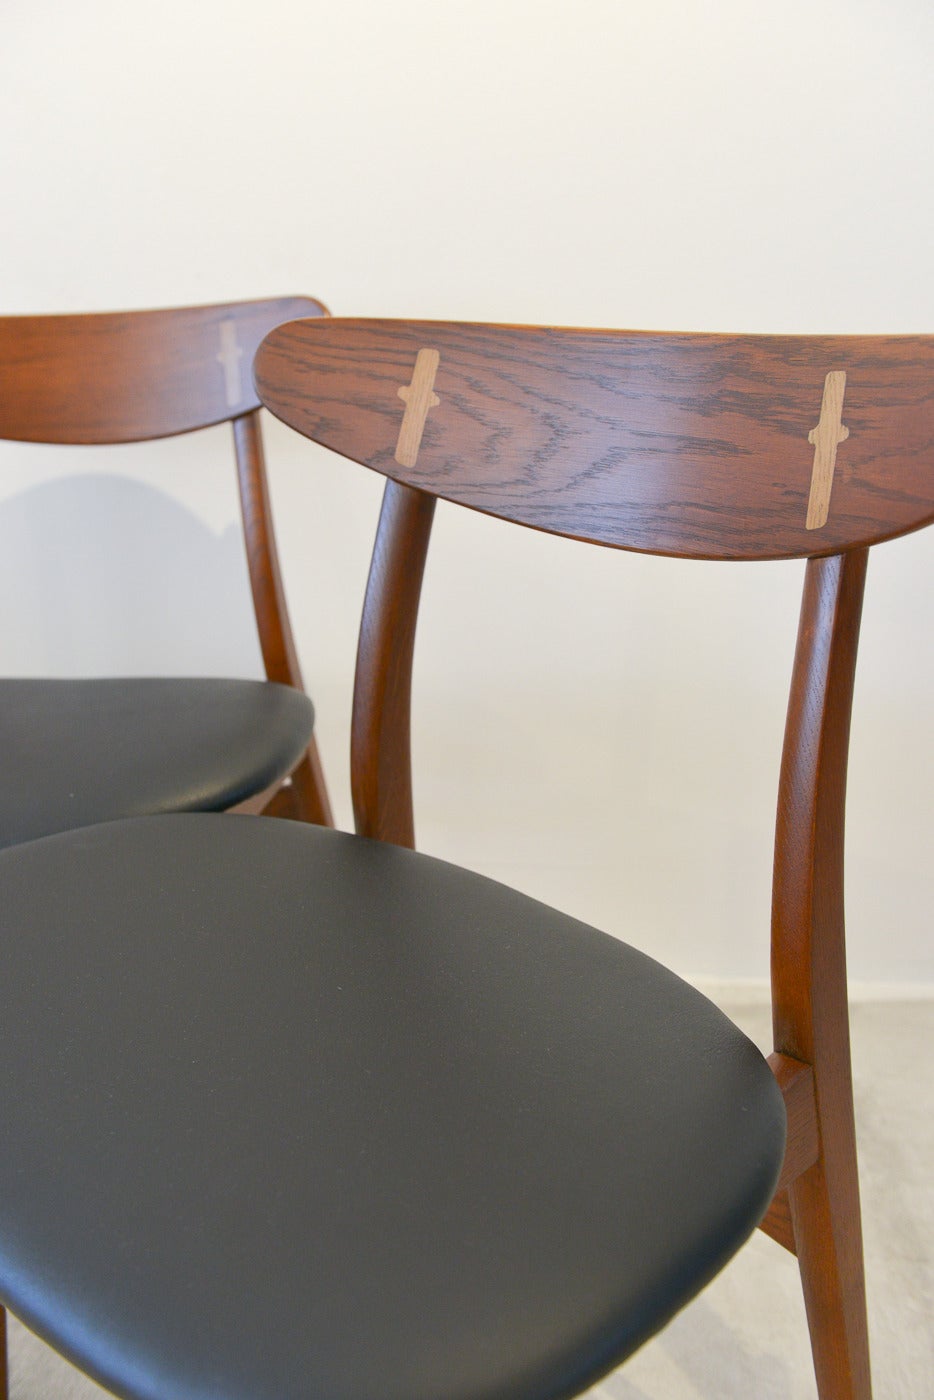 This beautiful pair of original Hans Wegner model CH-30 for Carl Hansen dining chairs has been professionally restored with beautiful black vinyl seats. Still retains the original labels on the underside, dated March 16, 1955.

Perfect vintage